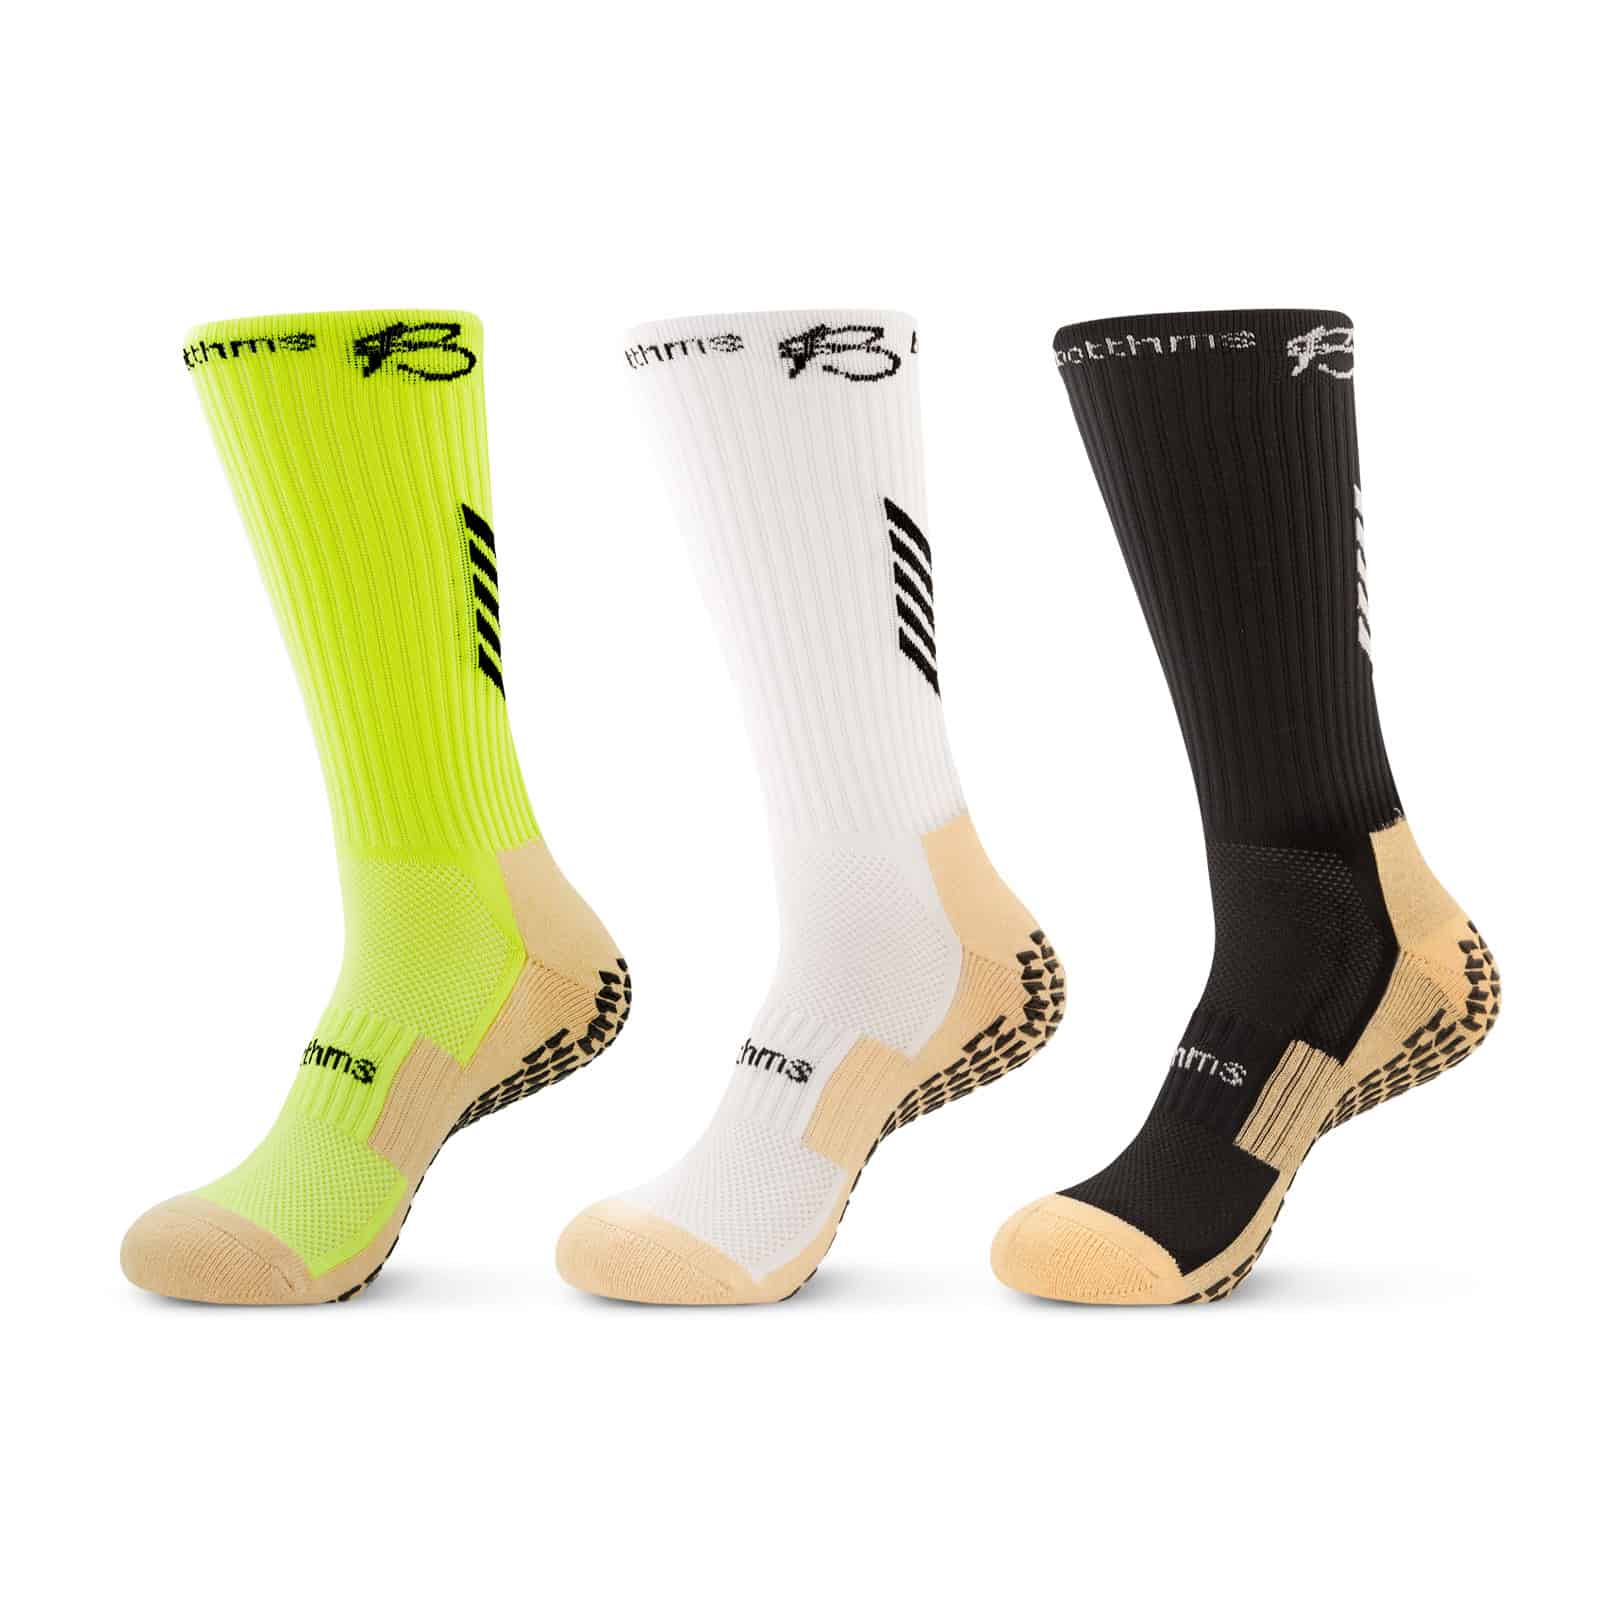 products/BTTHMS_TECH_SOCK3069_Combo.jpgproducts/BTTHMS_TECH_SOCK3062_Combo.jpg